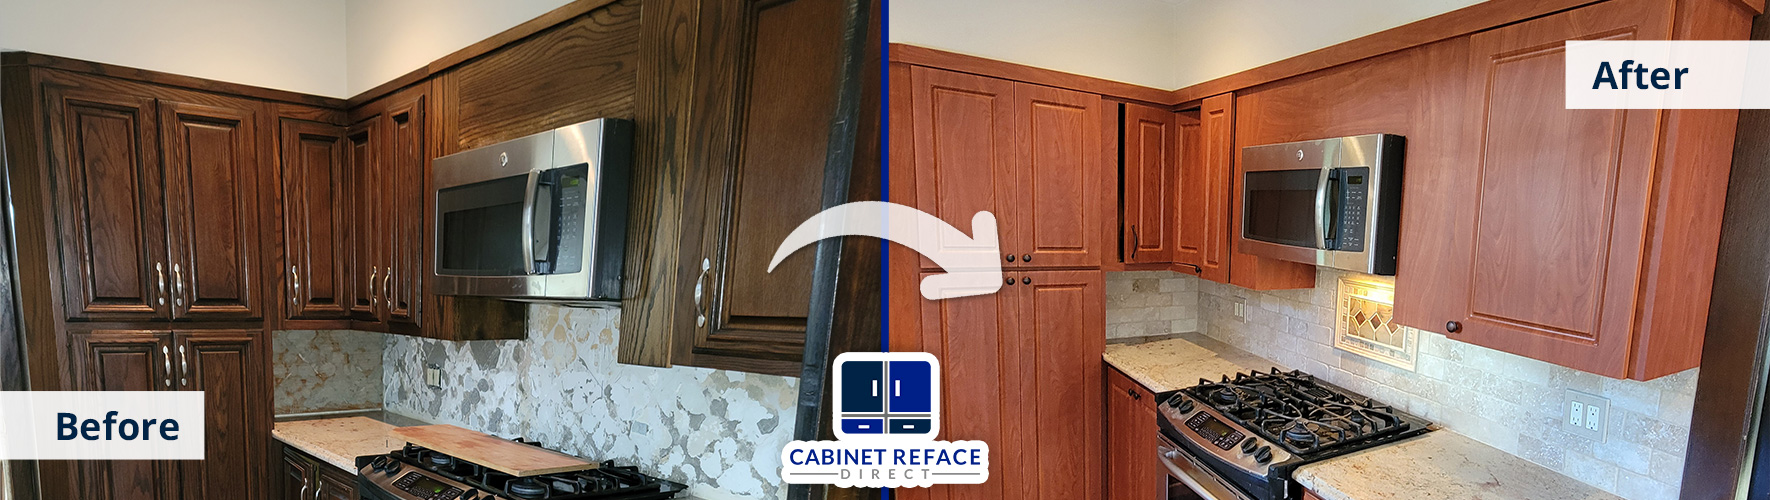 Old and Dark Wooden Cabinets Turned Into Their Modern Versions With Kitchen Cabinet Refacing